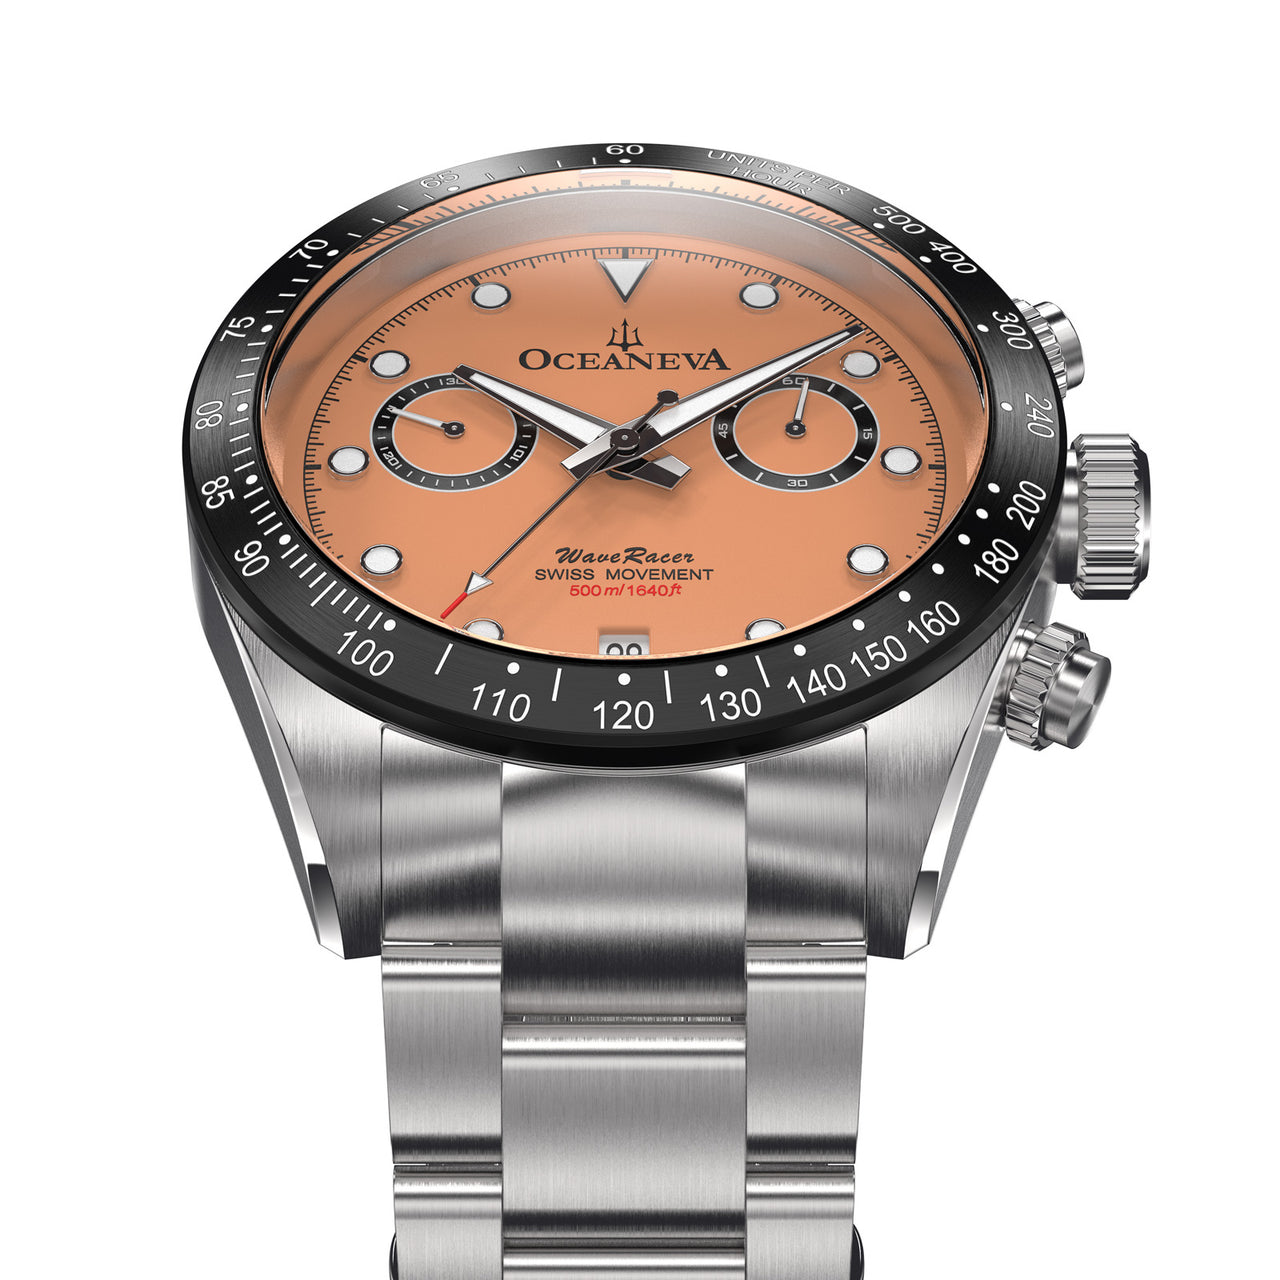 Oceaneva Salmon Chronograph Watch Frontal View Picture